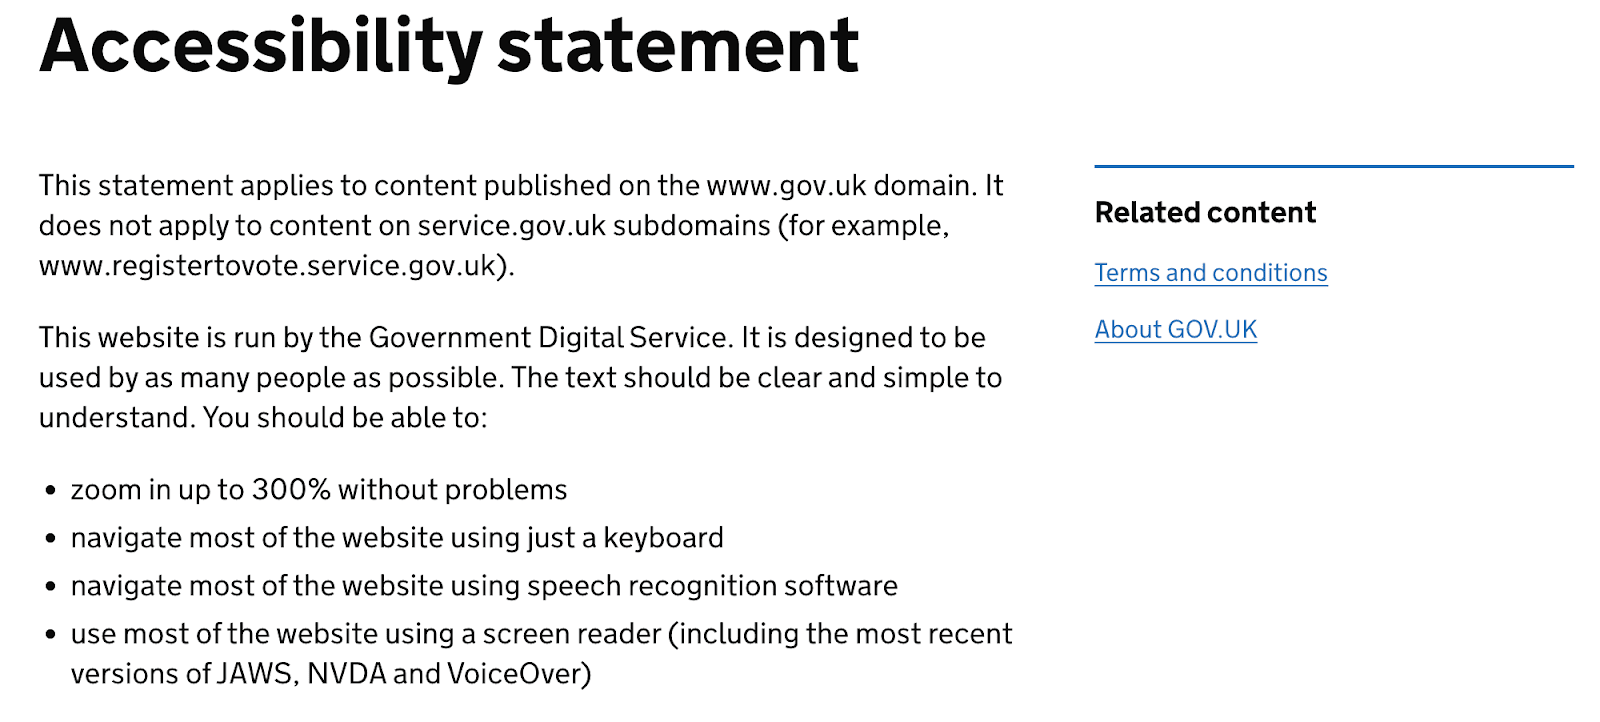 Screenshot of the Accessibility statement of gov.uk